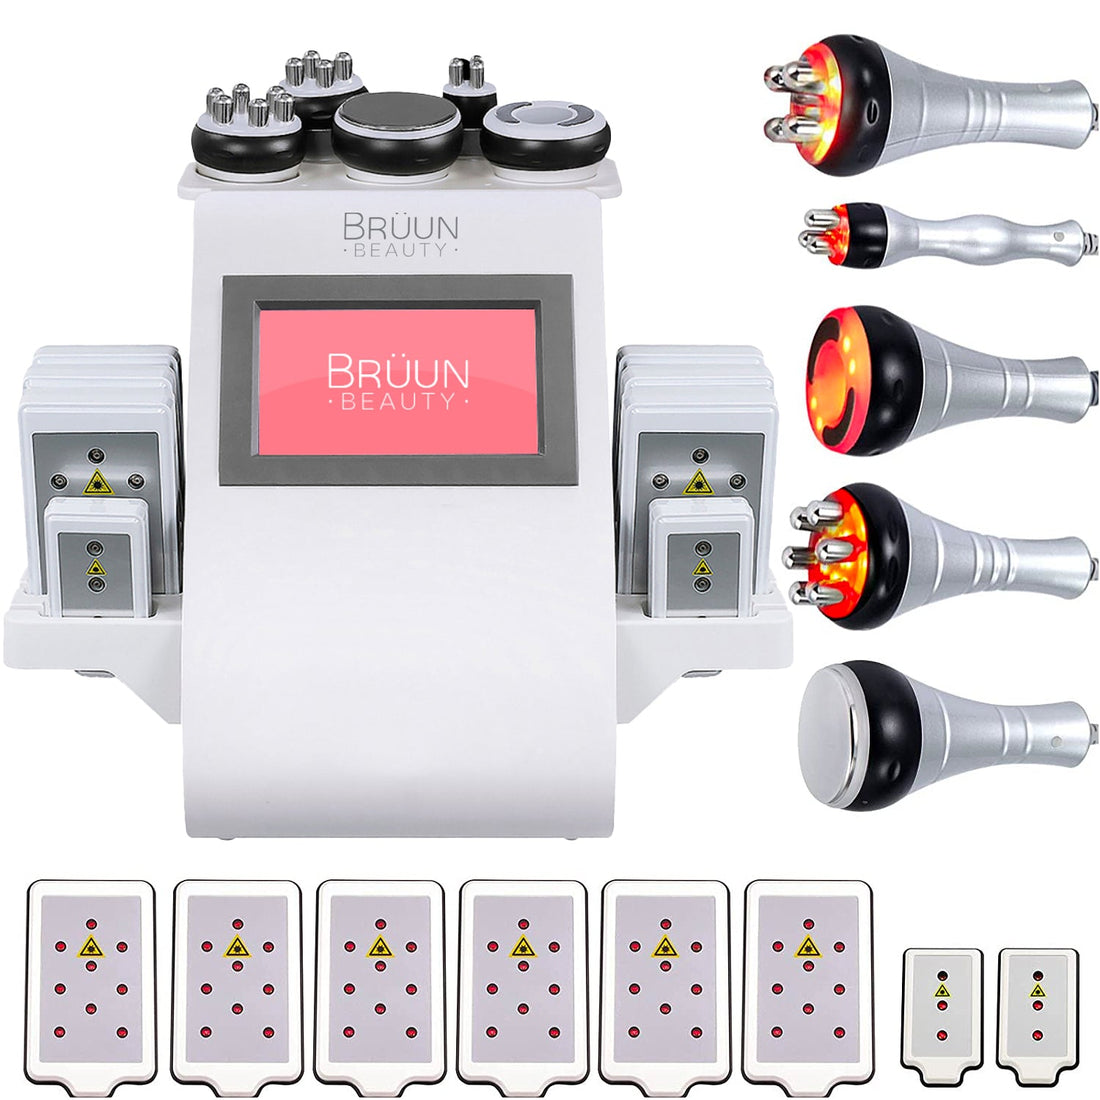 BRÜUN - 40K Ultrasonic Cavitation Machine 3.0 for Skin Tightening and Weight Lose - RF Vacuum for Fat Burning and Body Shaping for Spa Use